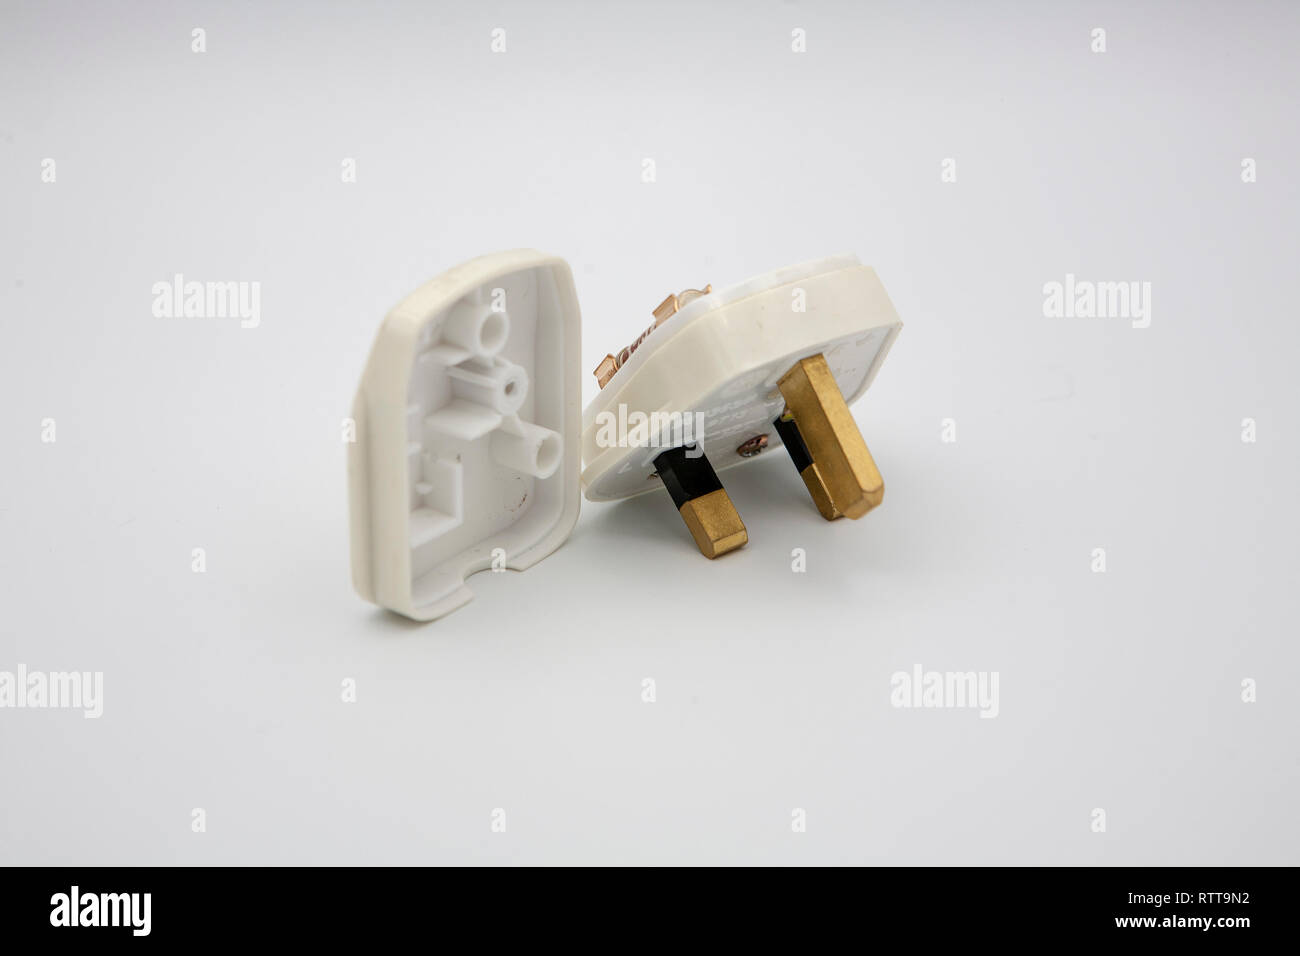 A UK Standard 3 PIN Plug with 13amp fuse, and the rear protective panel removed. Stock Photo